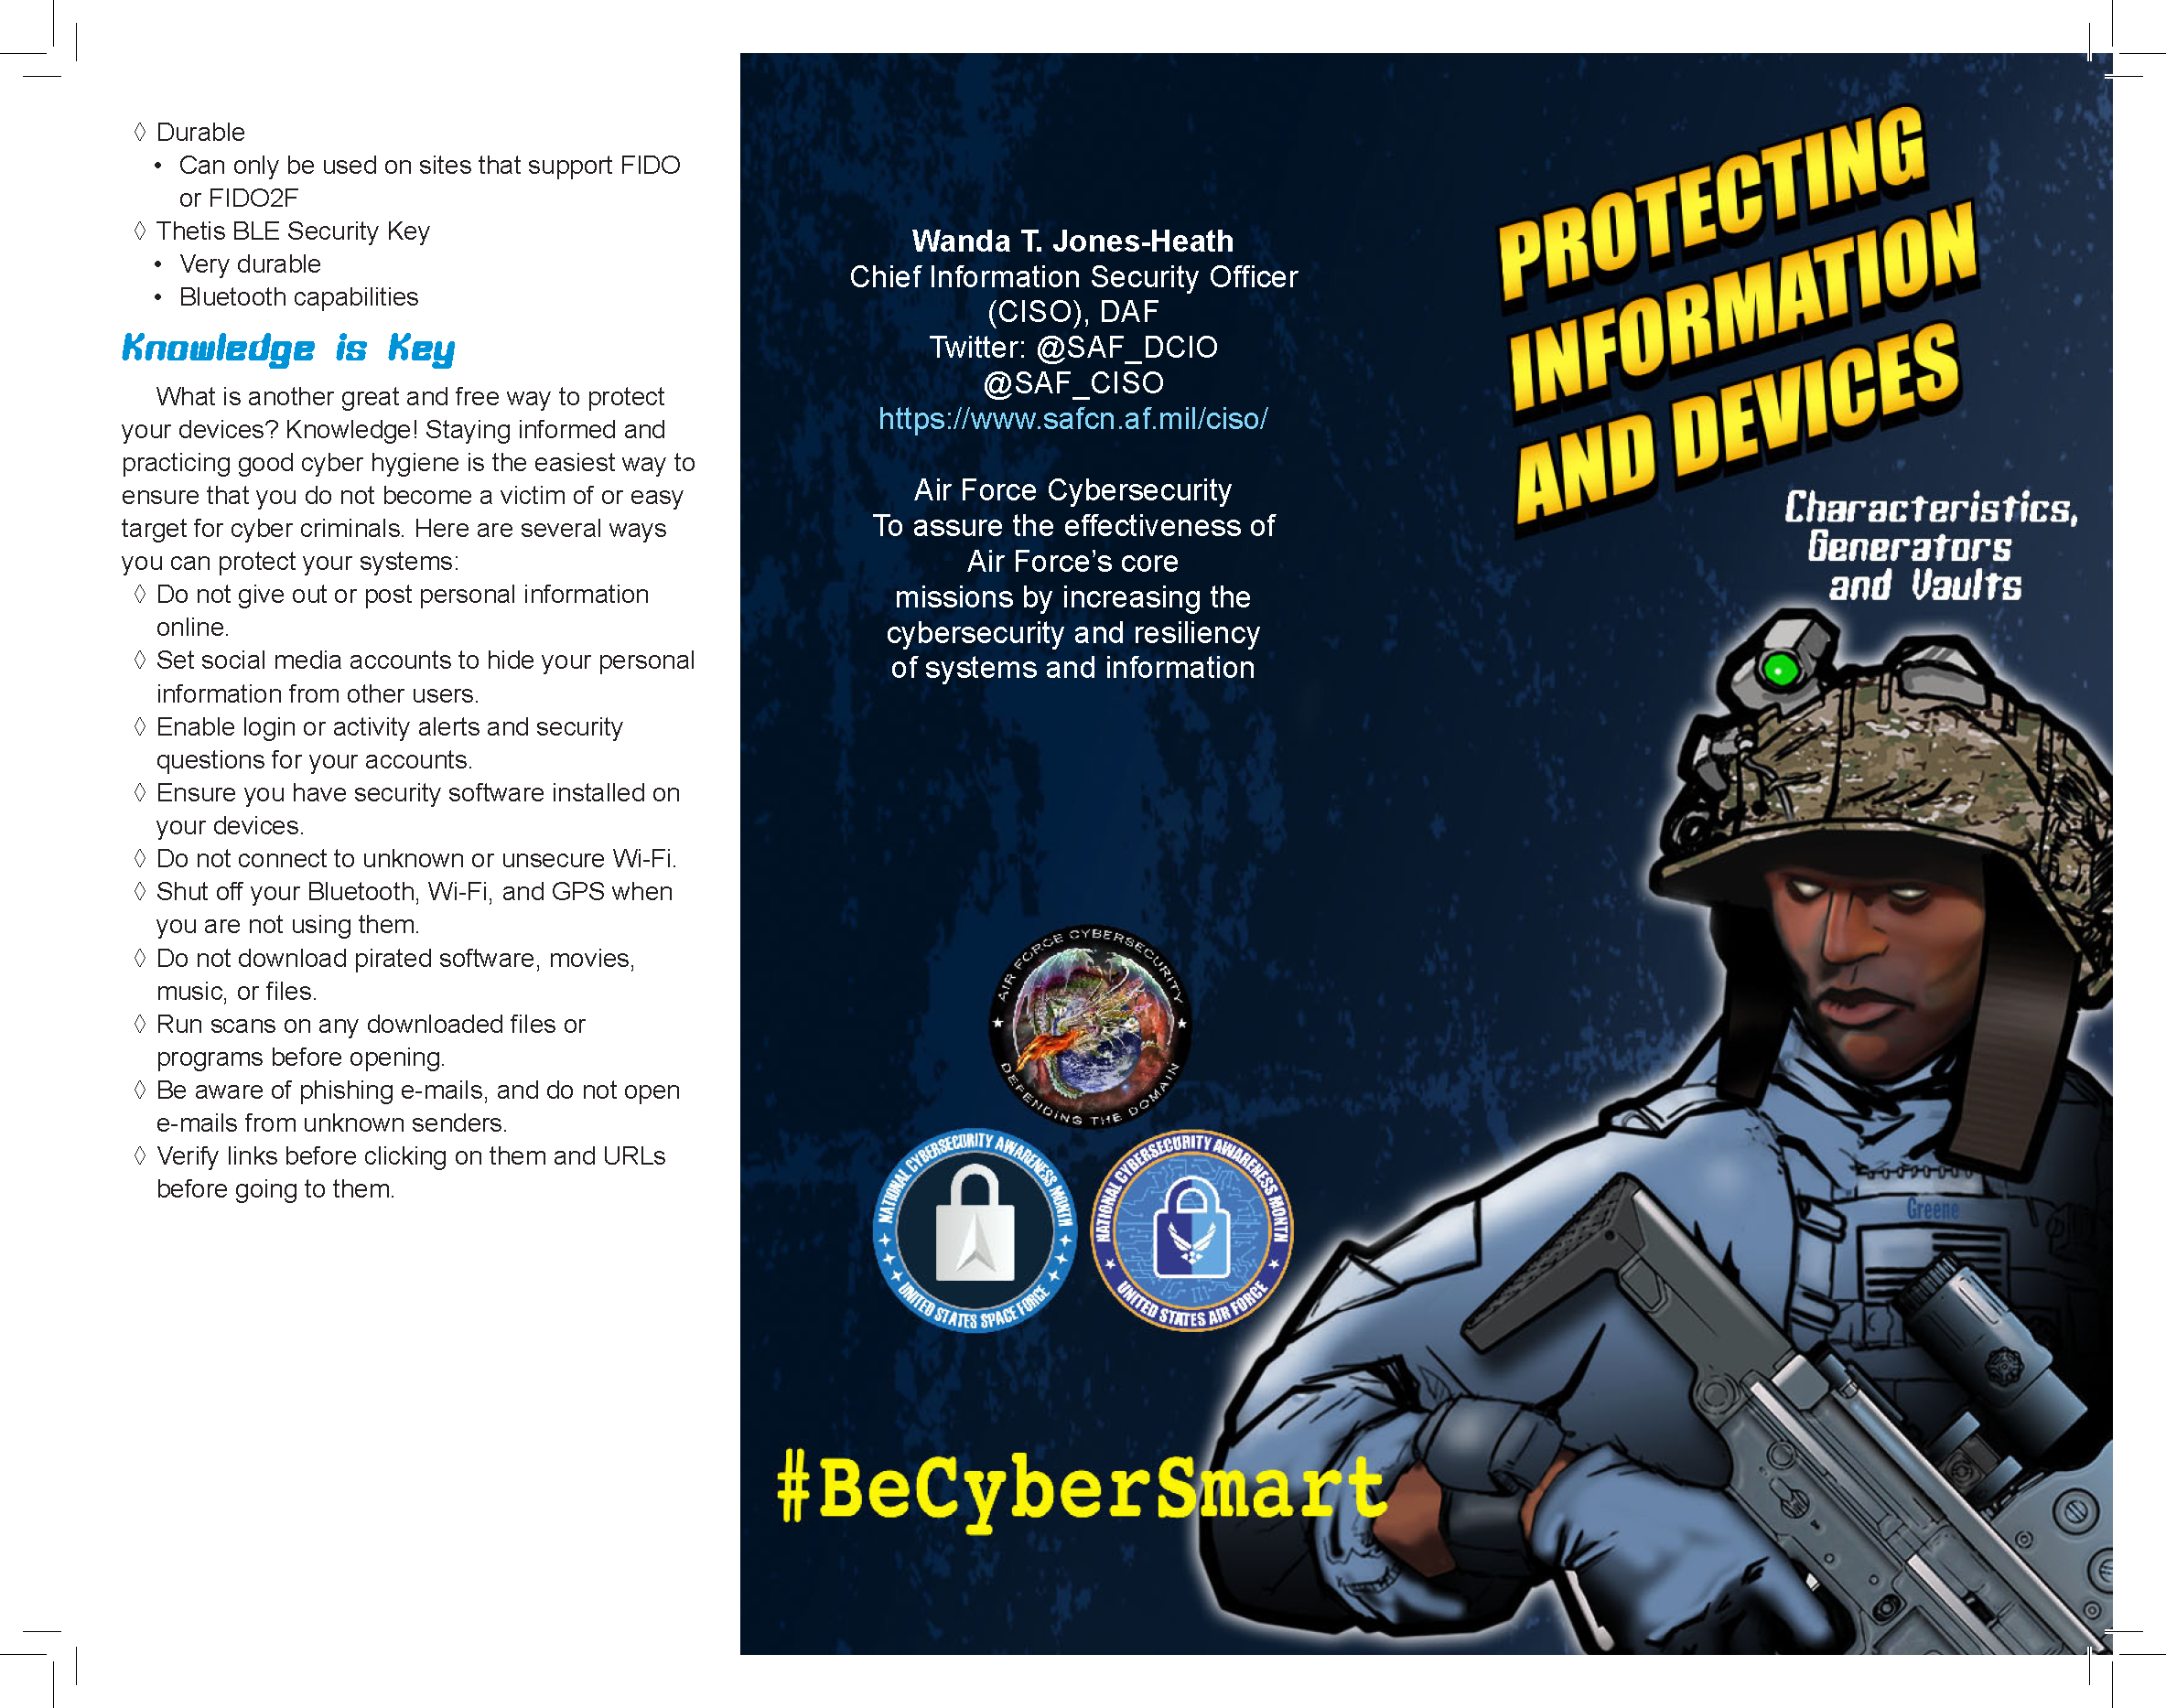 Cyber Month Protecting Information and Devices Virtual Handout 2020